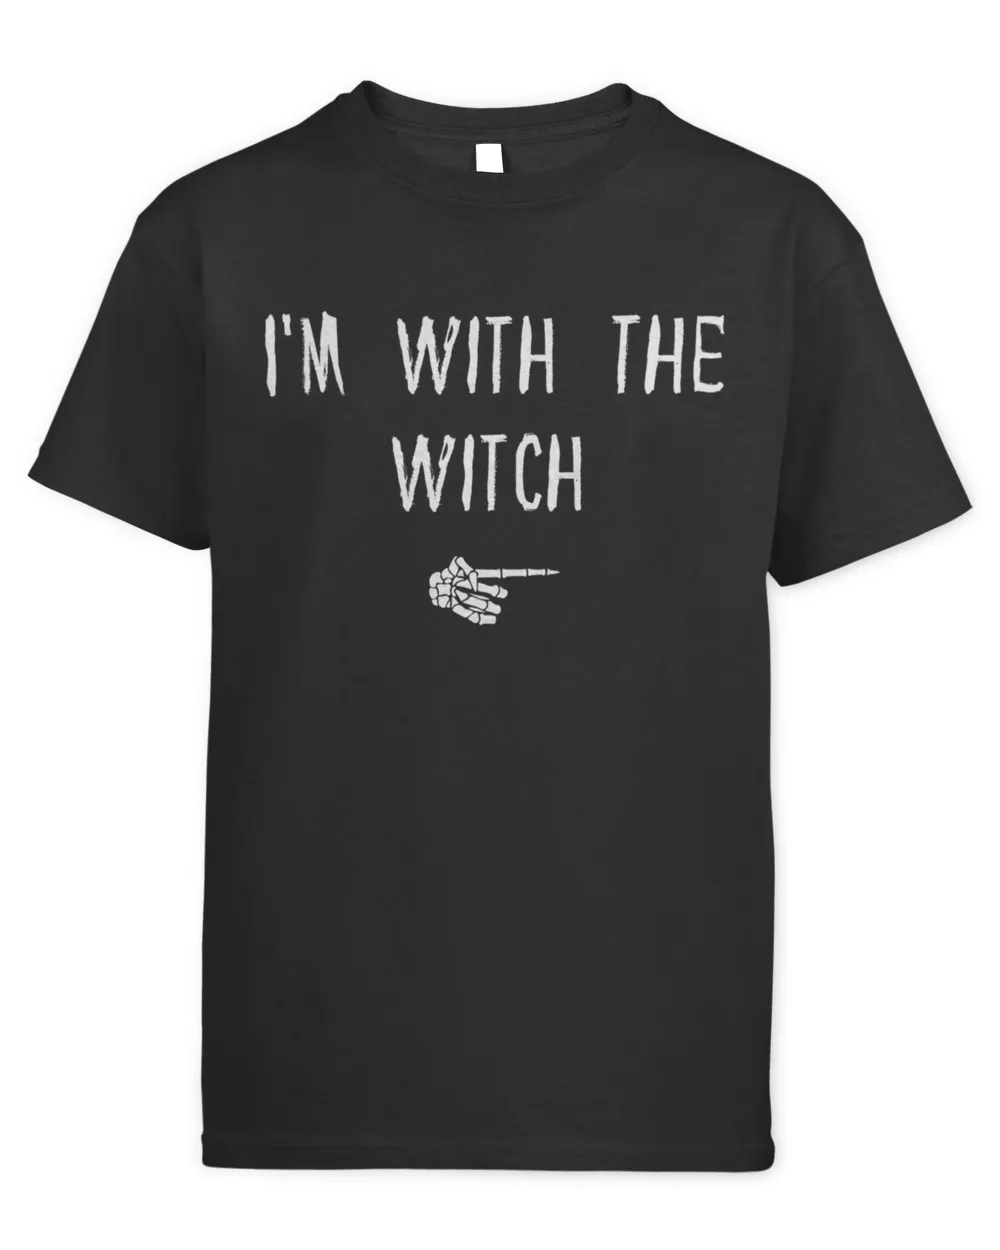 Mens Im With The Witch Halloween Couple Matching Costume Funny TShirt Gift T-Shirt